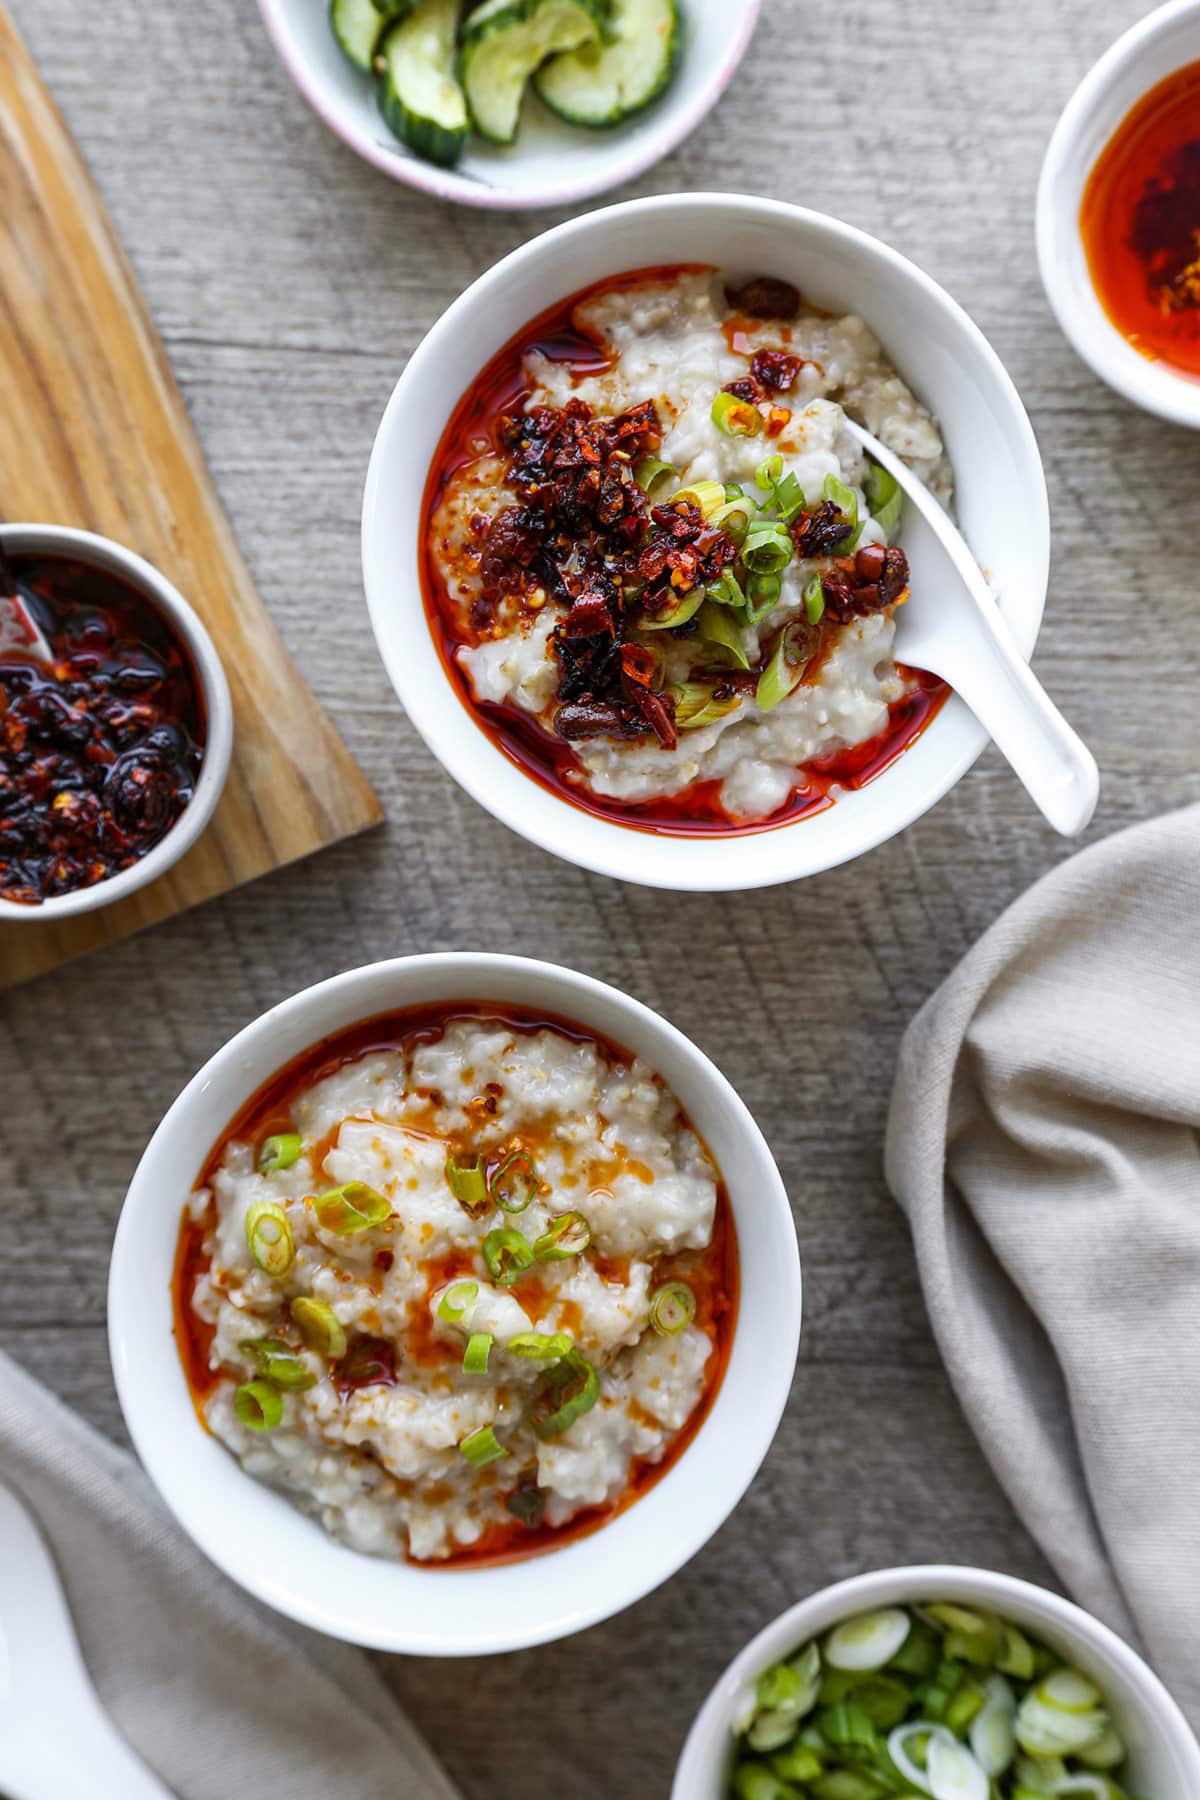 Chinese style oatmeal